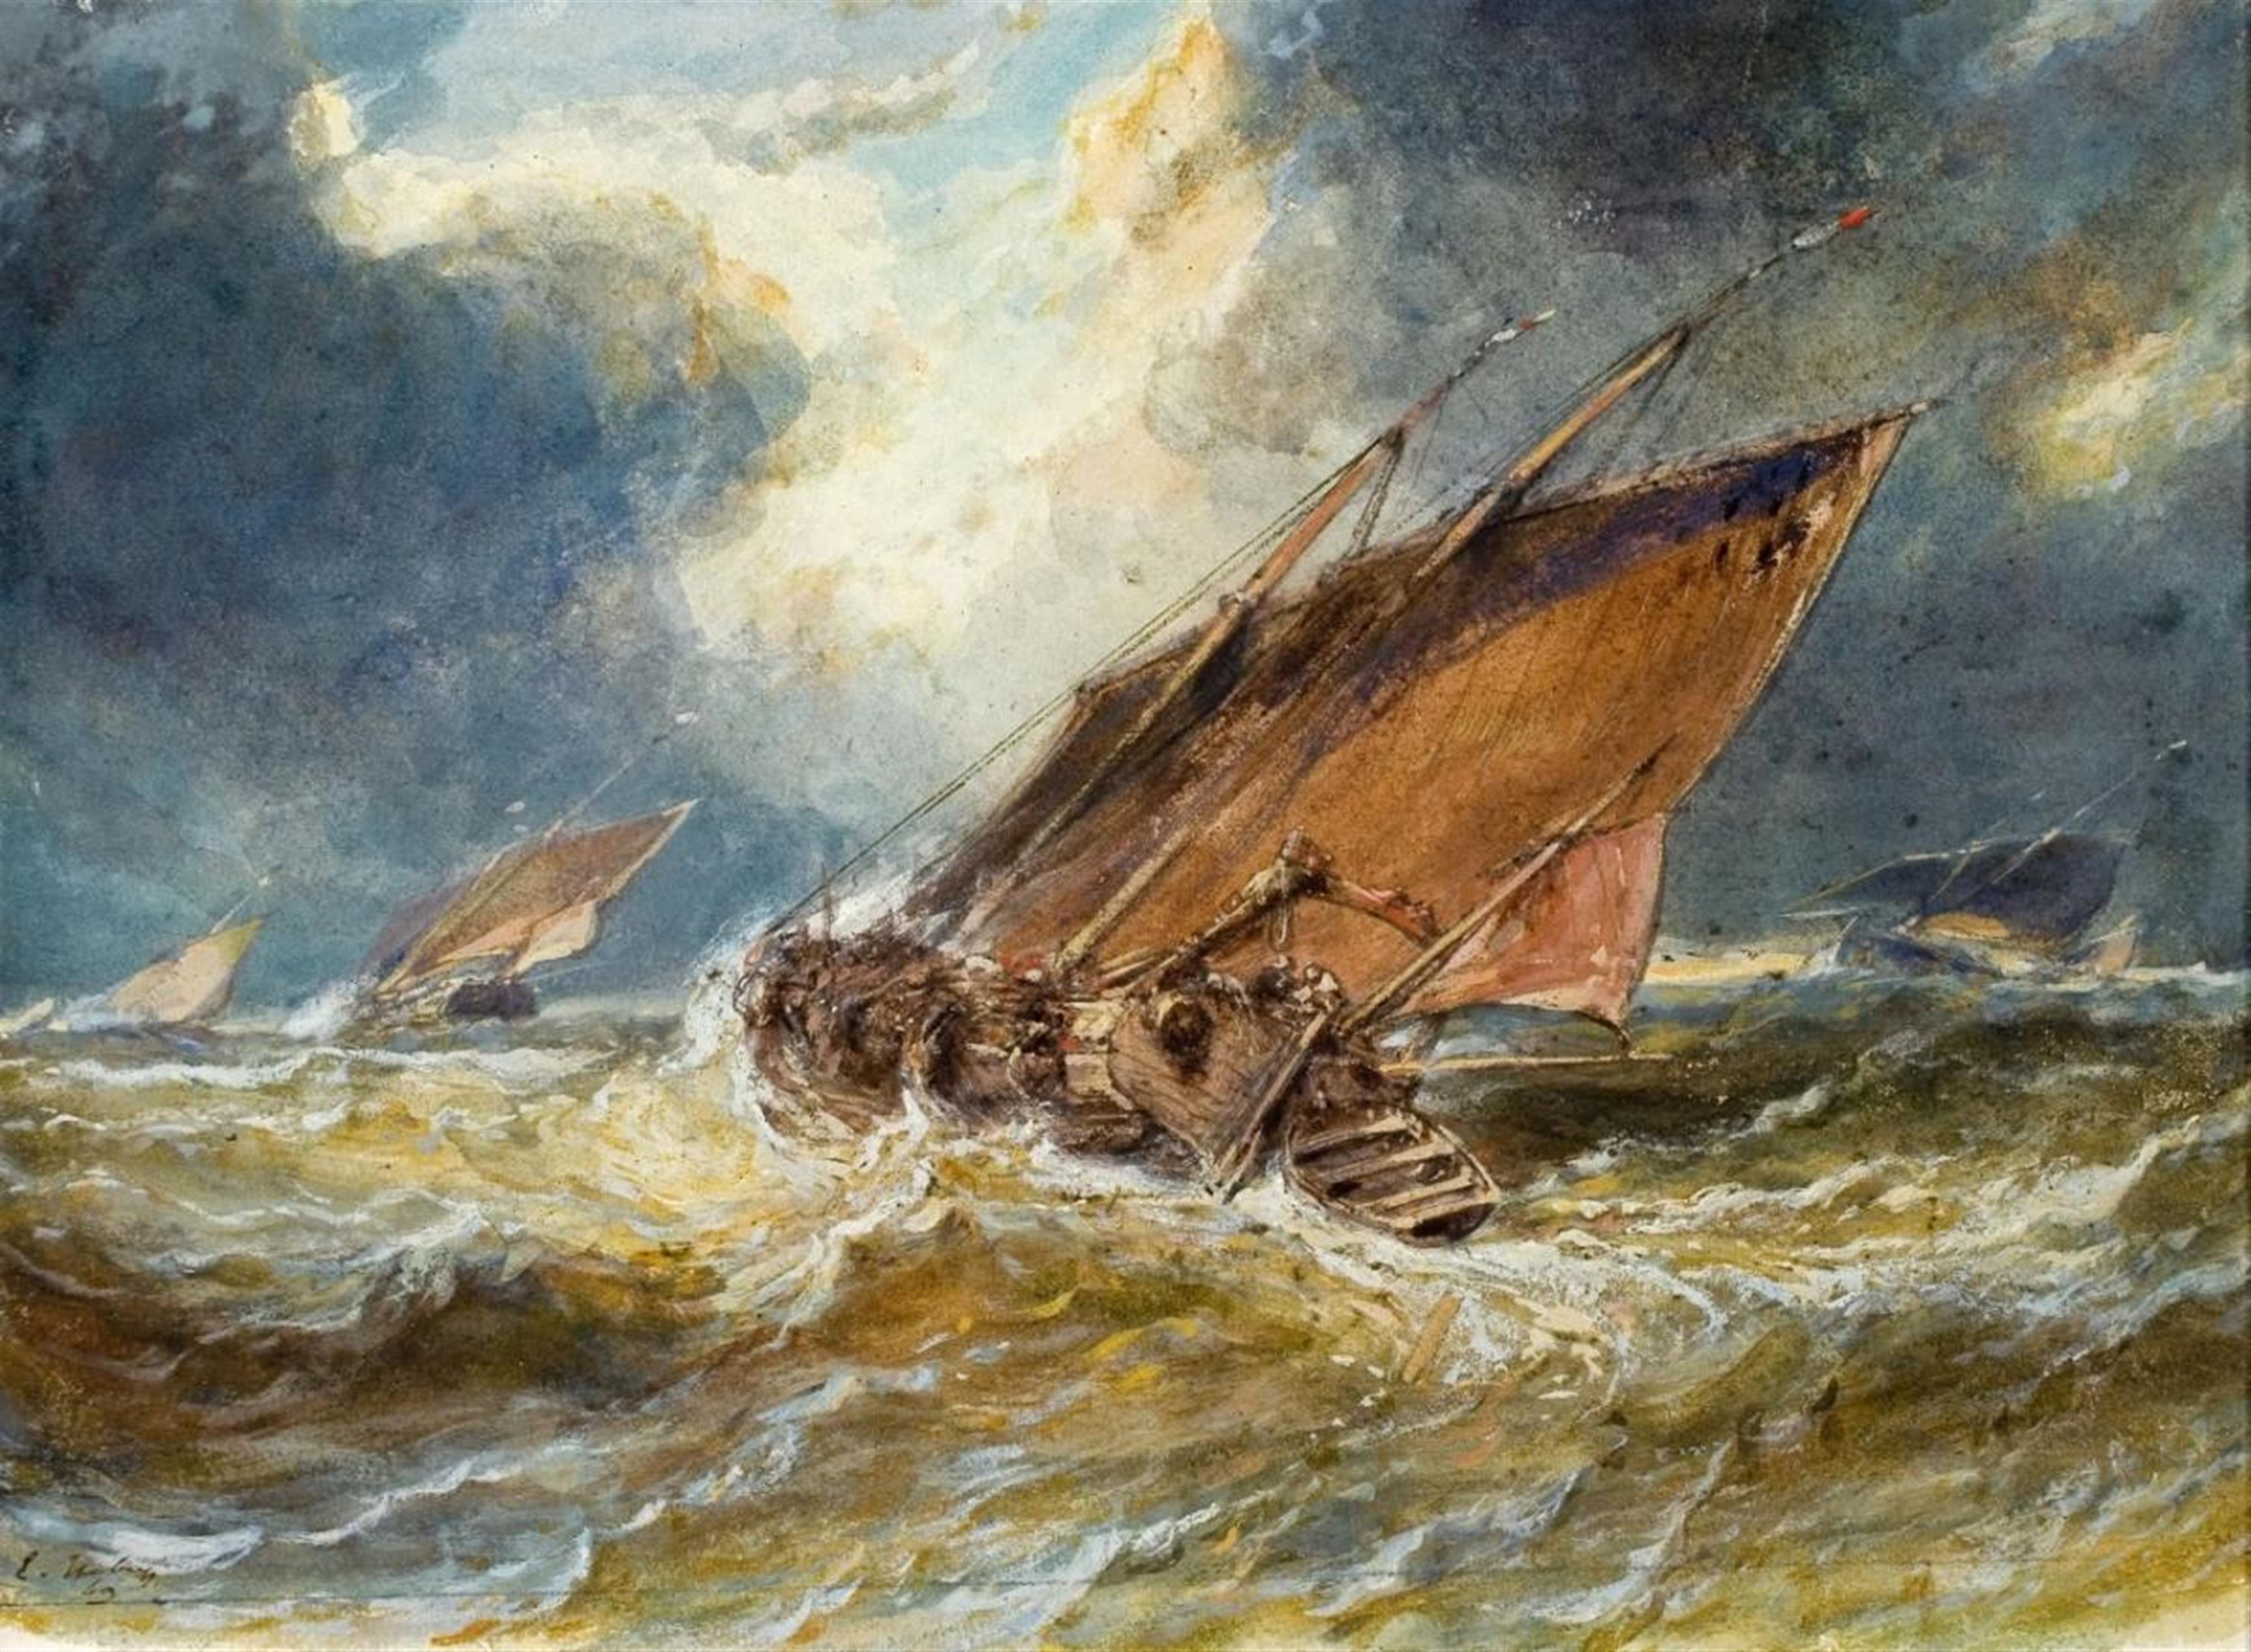 Eugène Isabey - SAILING BOATS IN A STORM - image-1